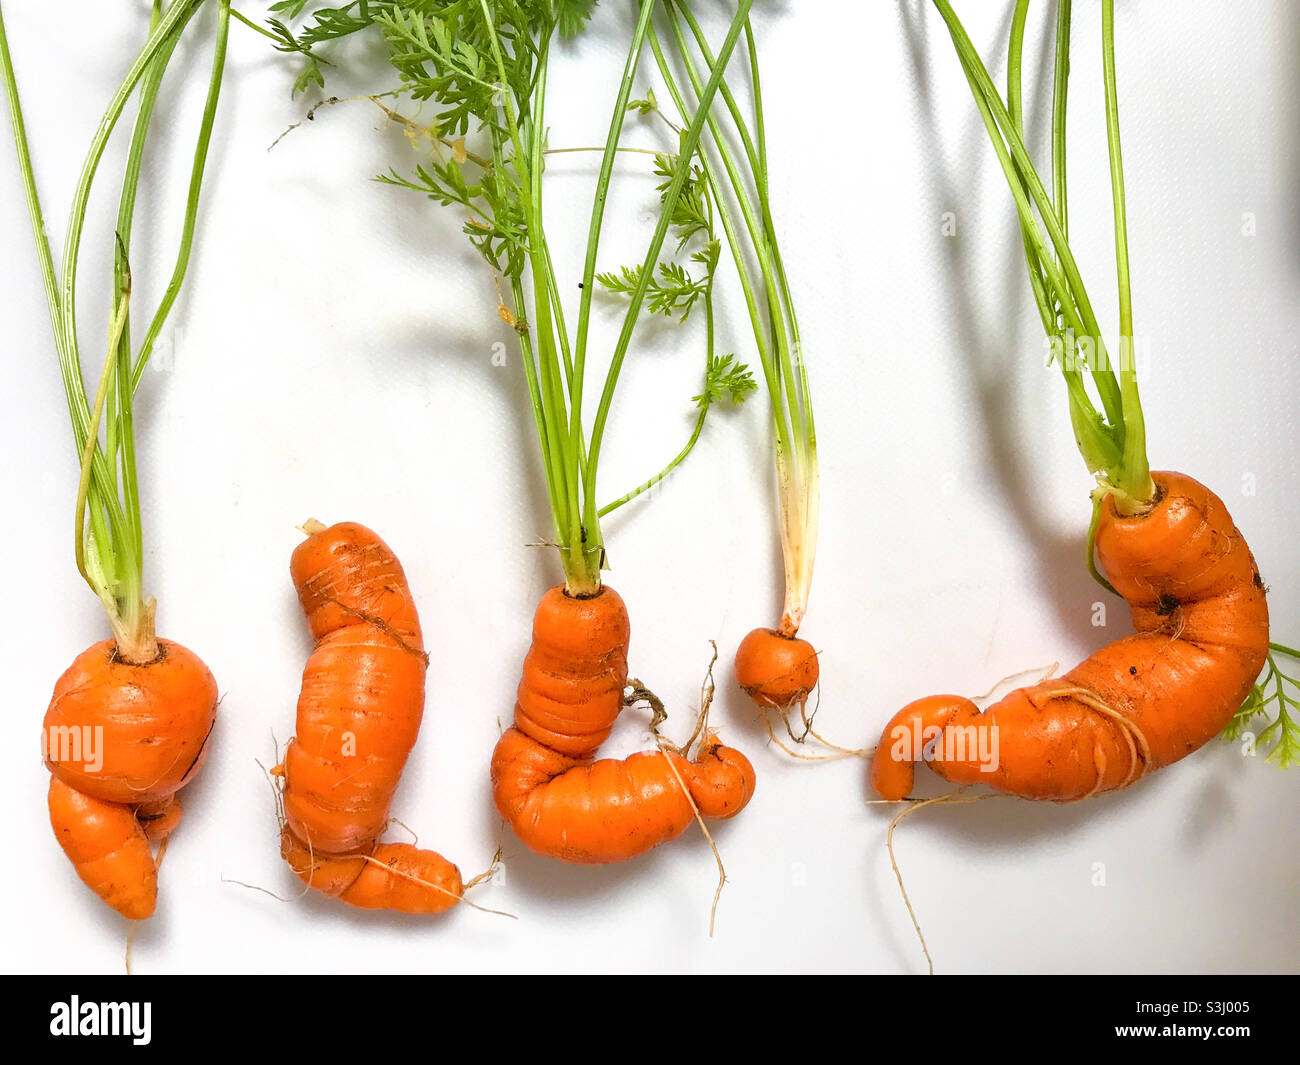 Carrots from the garden in unusual shapes. Stock Photo